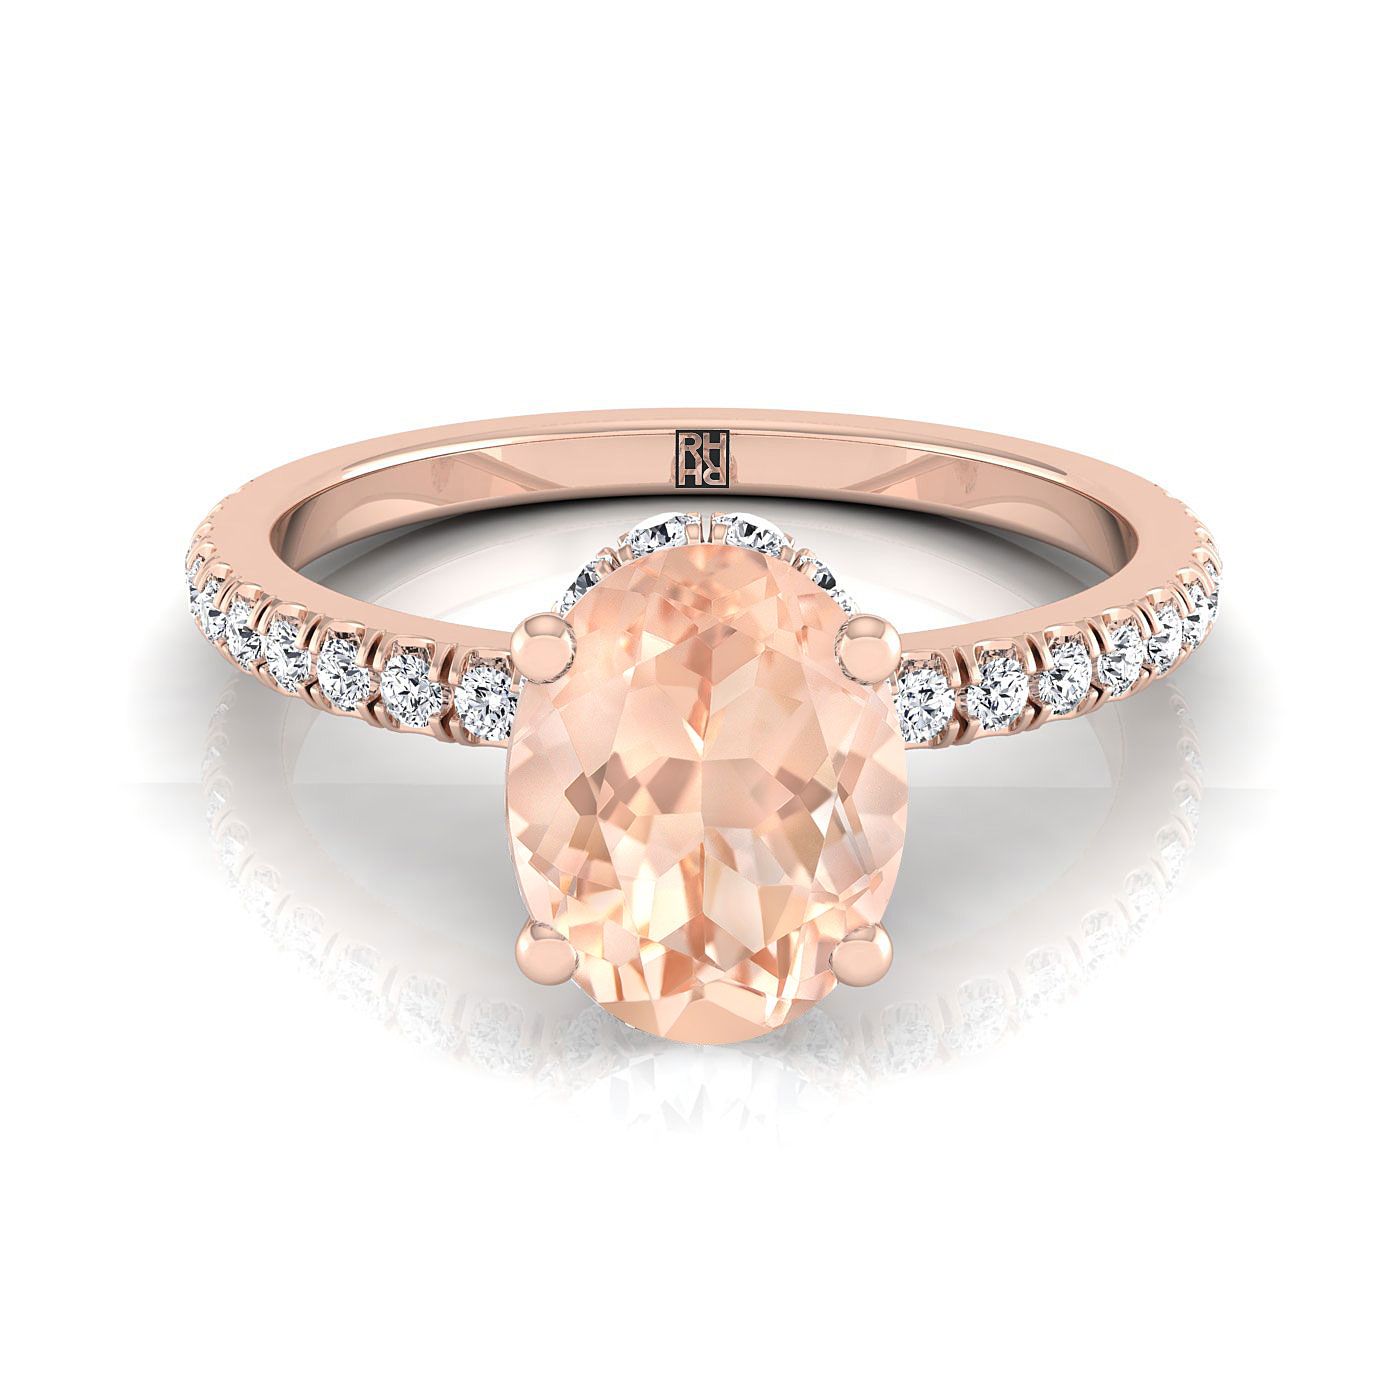 14K Rose Gold Oval Morganite Secret Diamond Halo French Pave Solitaire Engagement Ring -1/3ctw